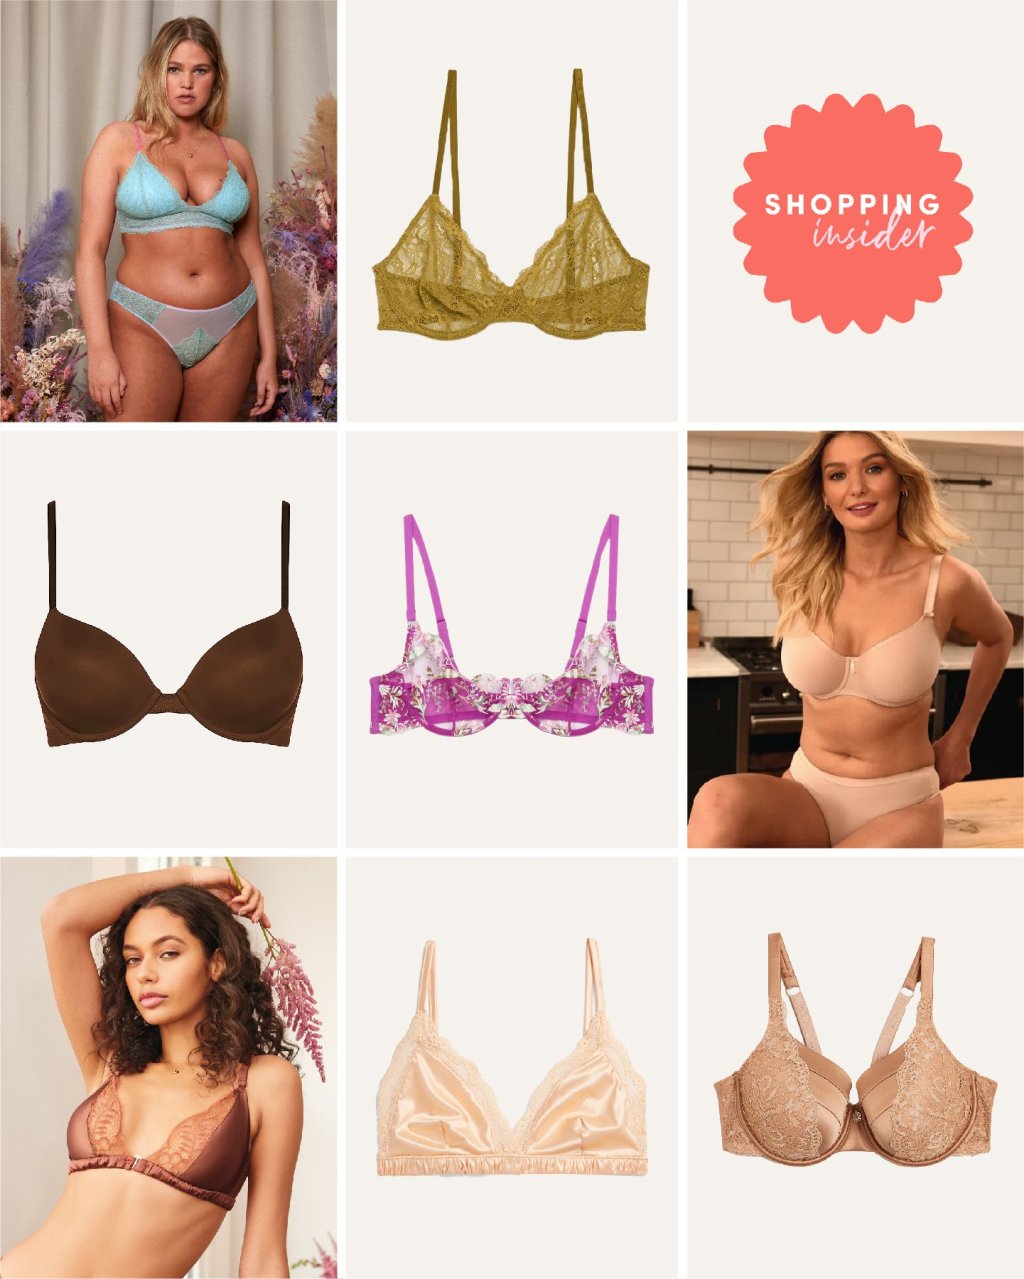 What kind of bra should I wear with a deep halter neck blouse for